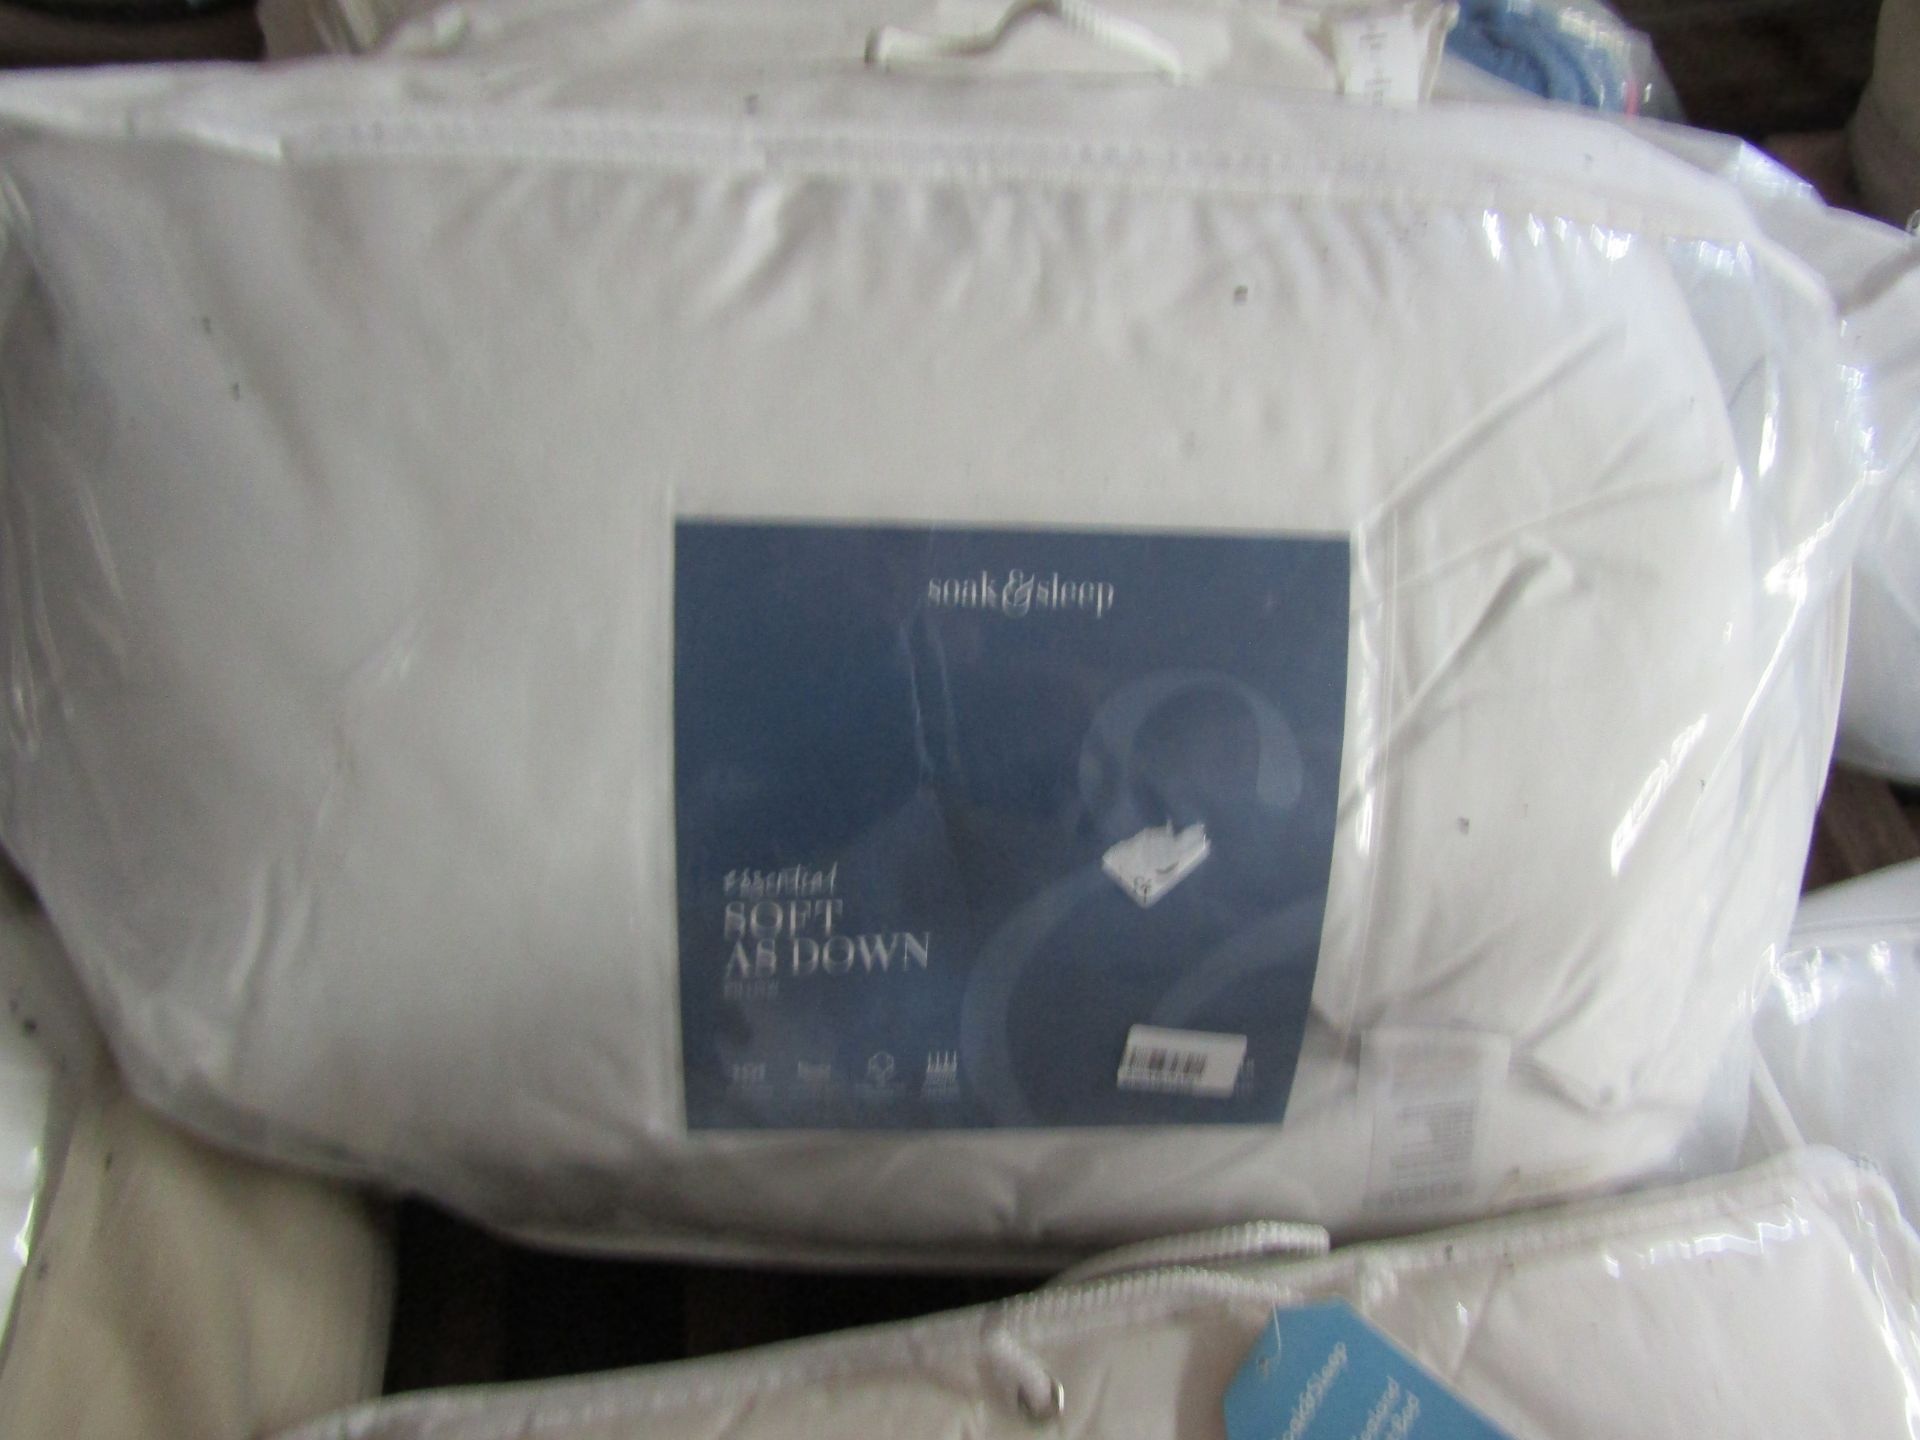 Soak & Sleep Supremely Soft & Down Medium Pillow RRP 54 This product has been graded in A condition,